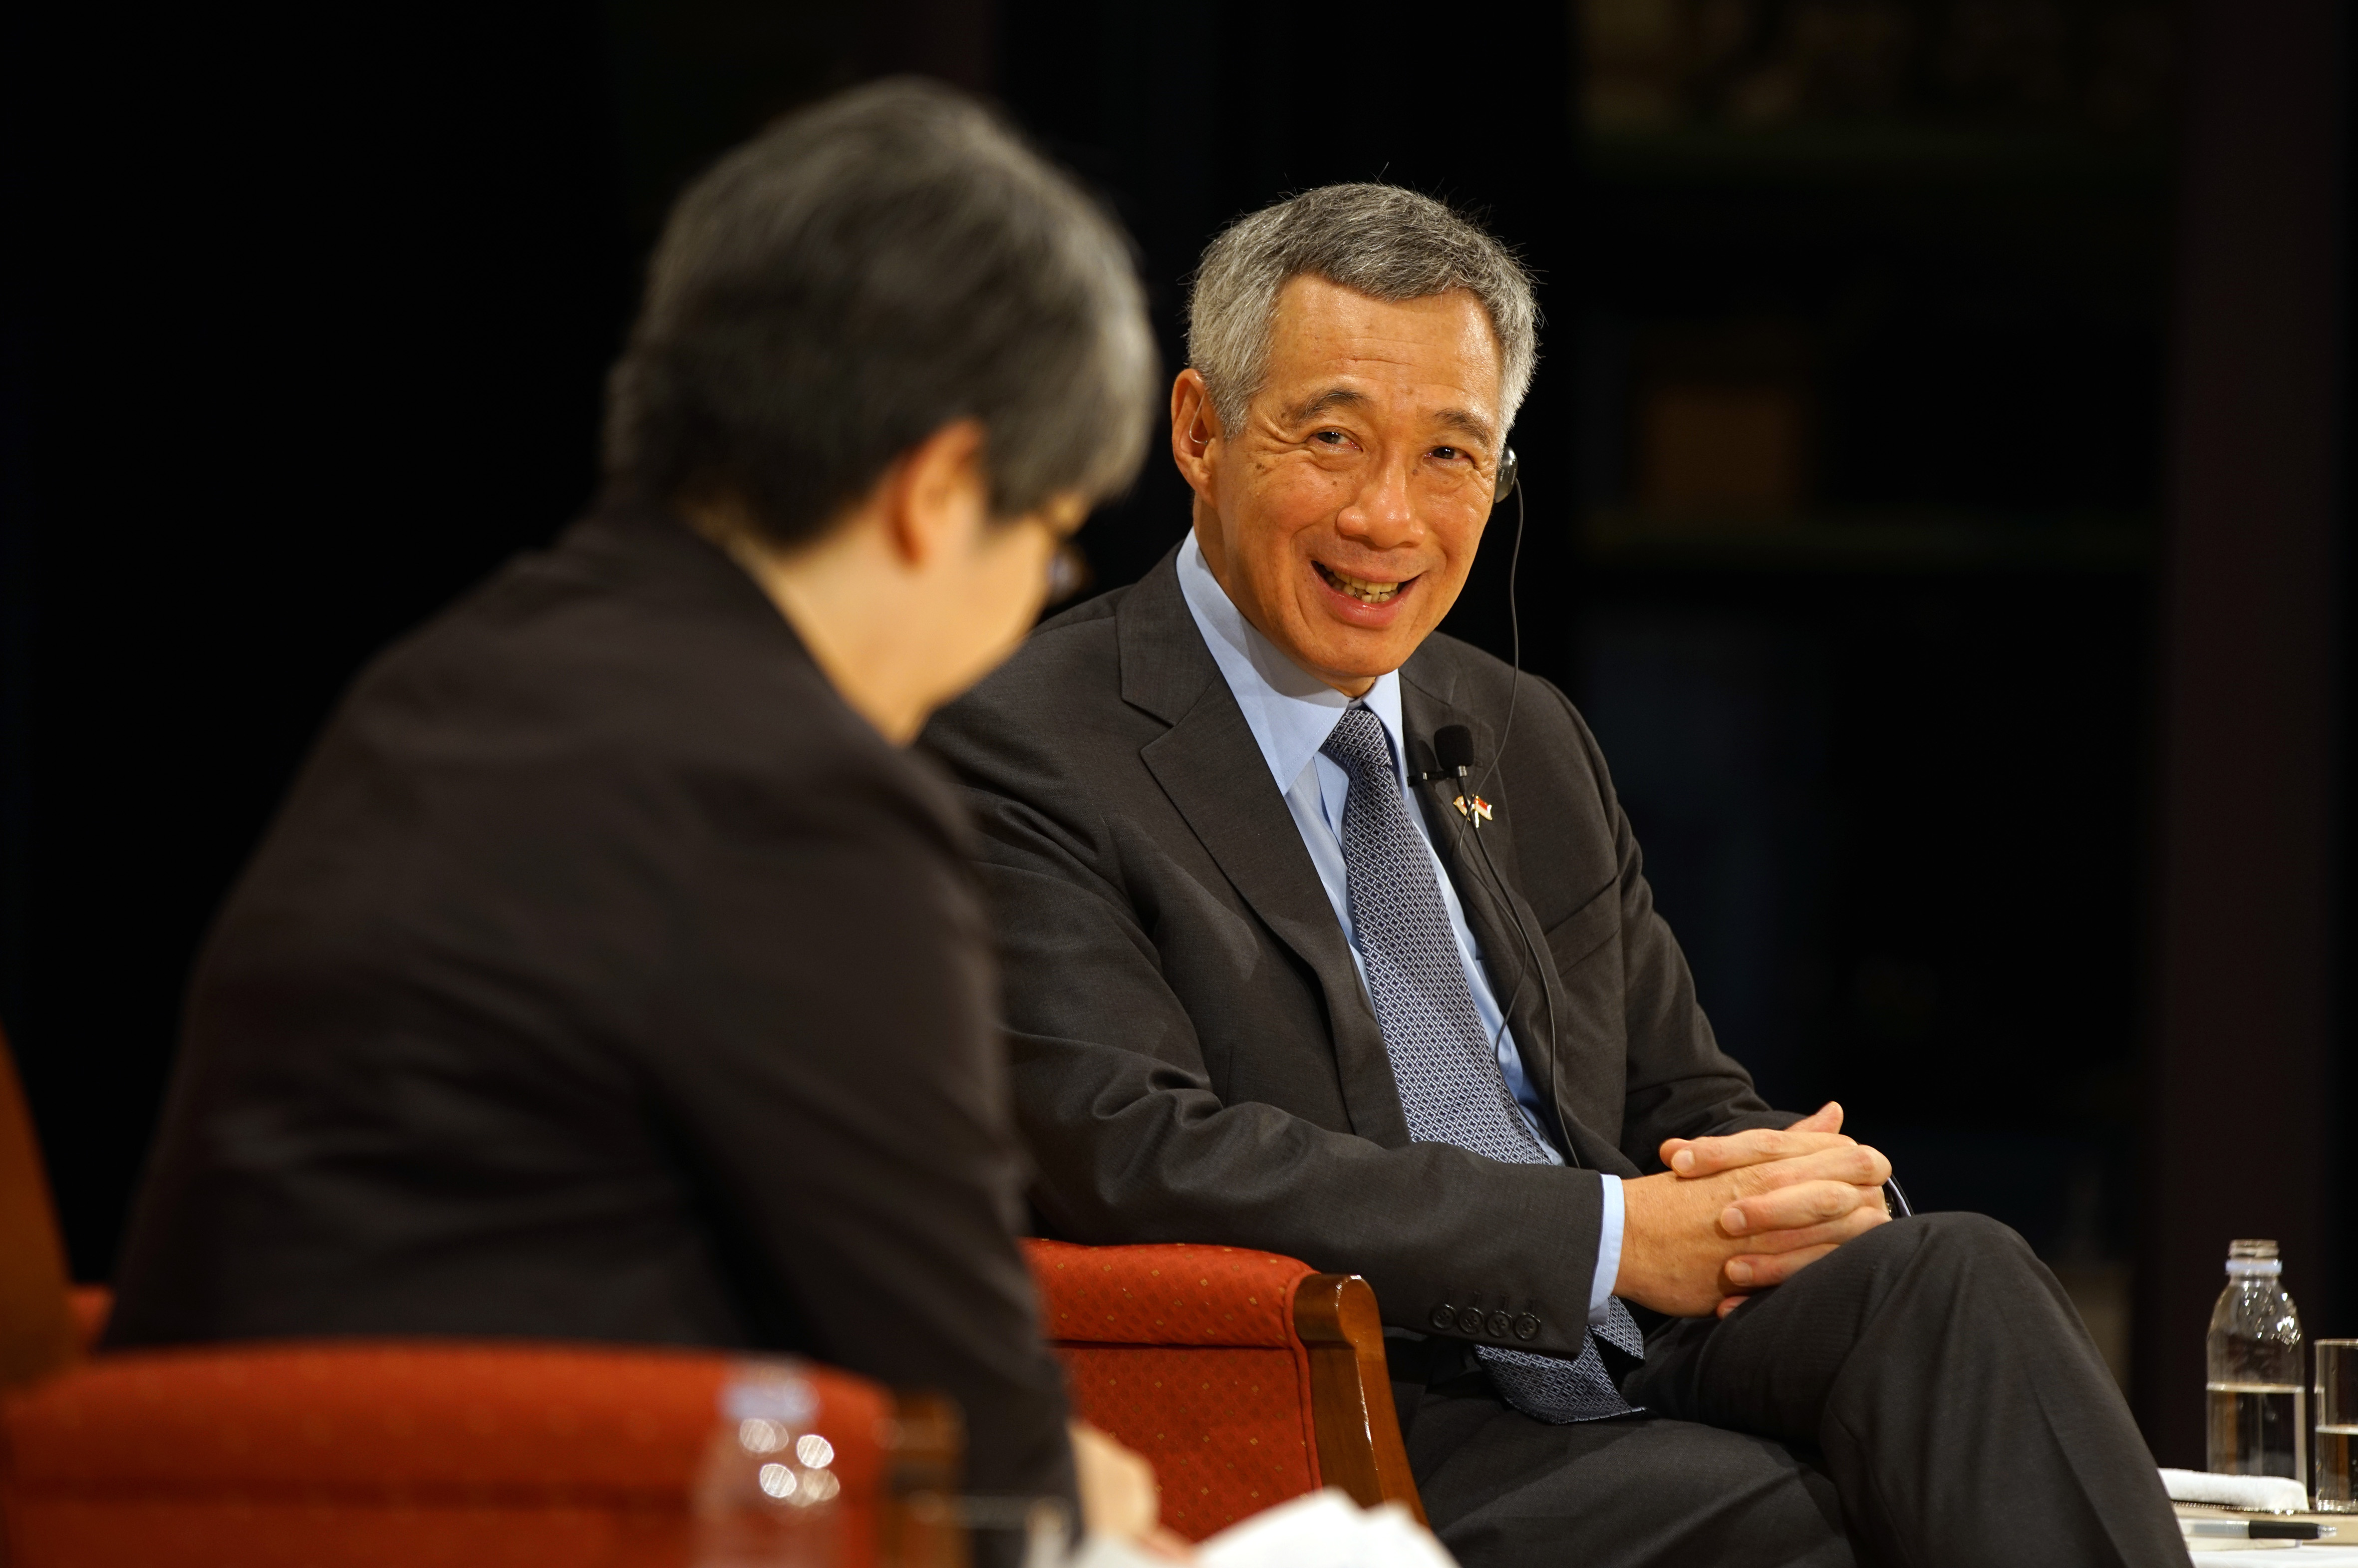 PM Lee Hsien Loong's Dialogue at the Special Session of the Nikkei International Conference on the Future of Asia